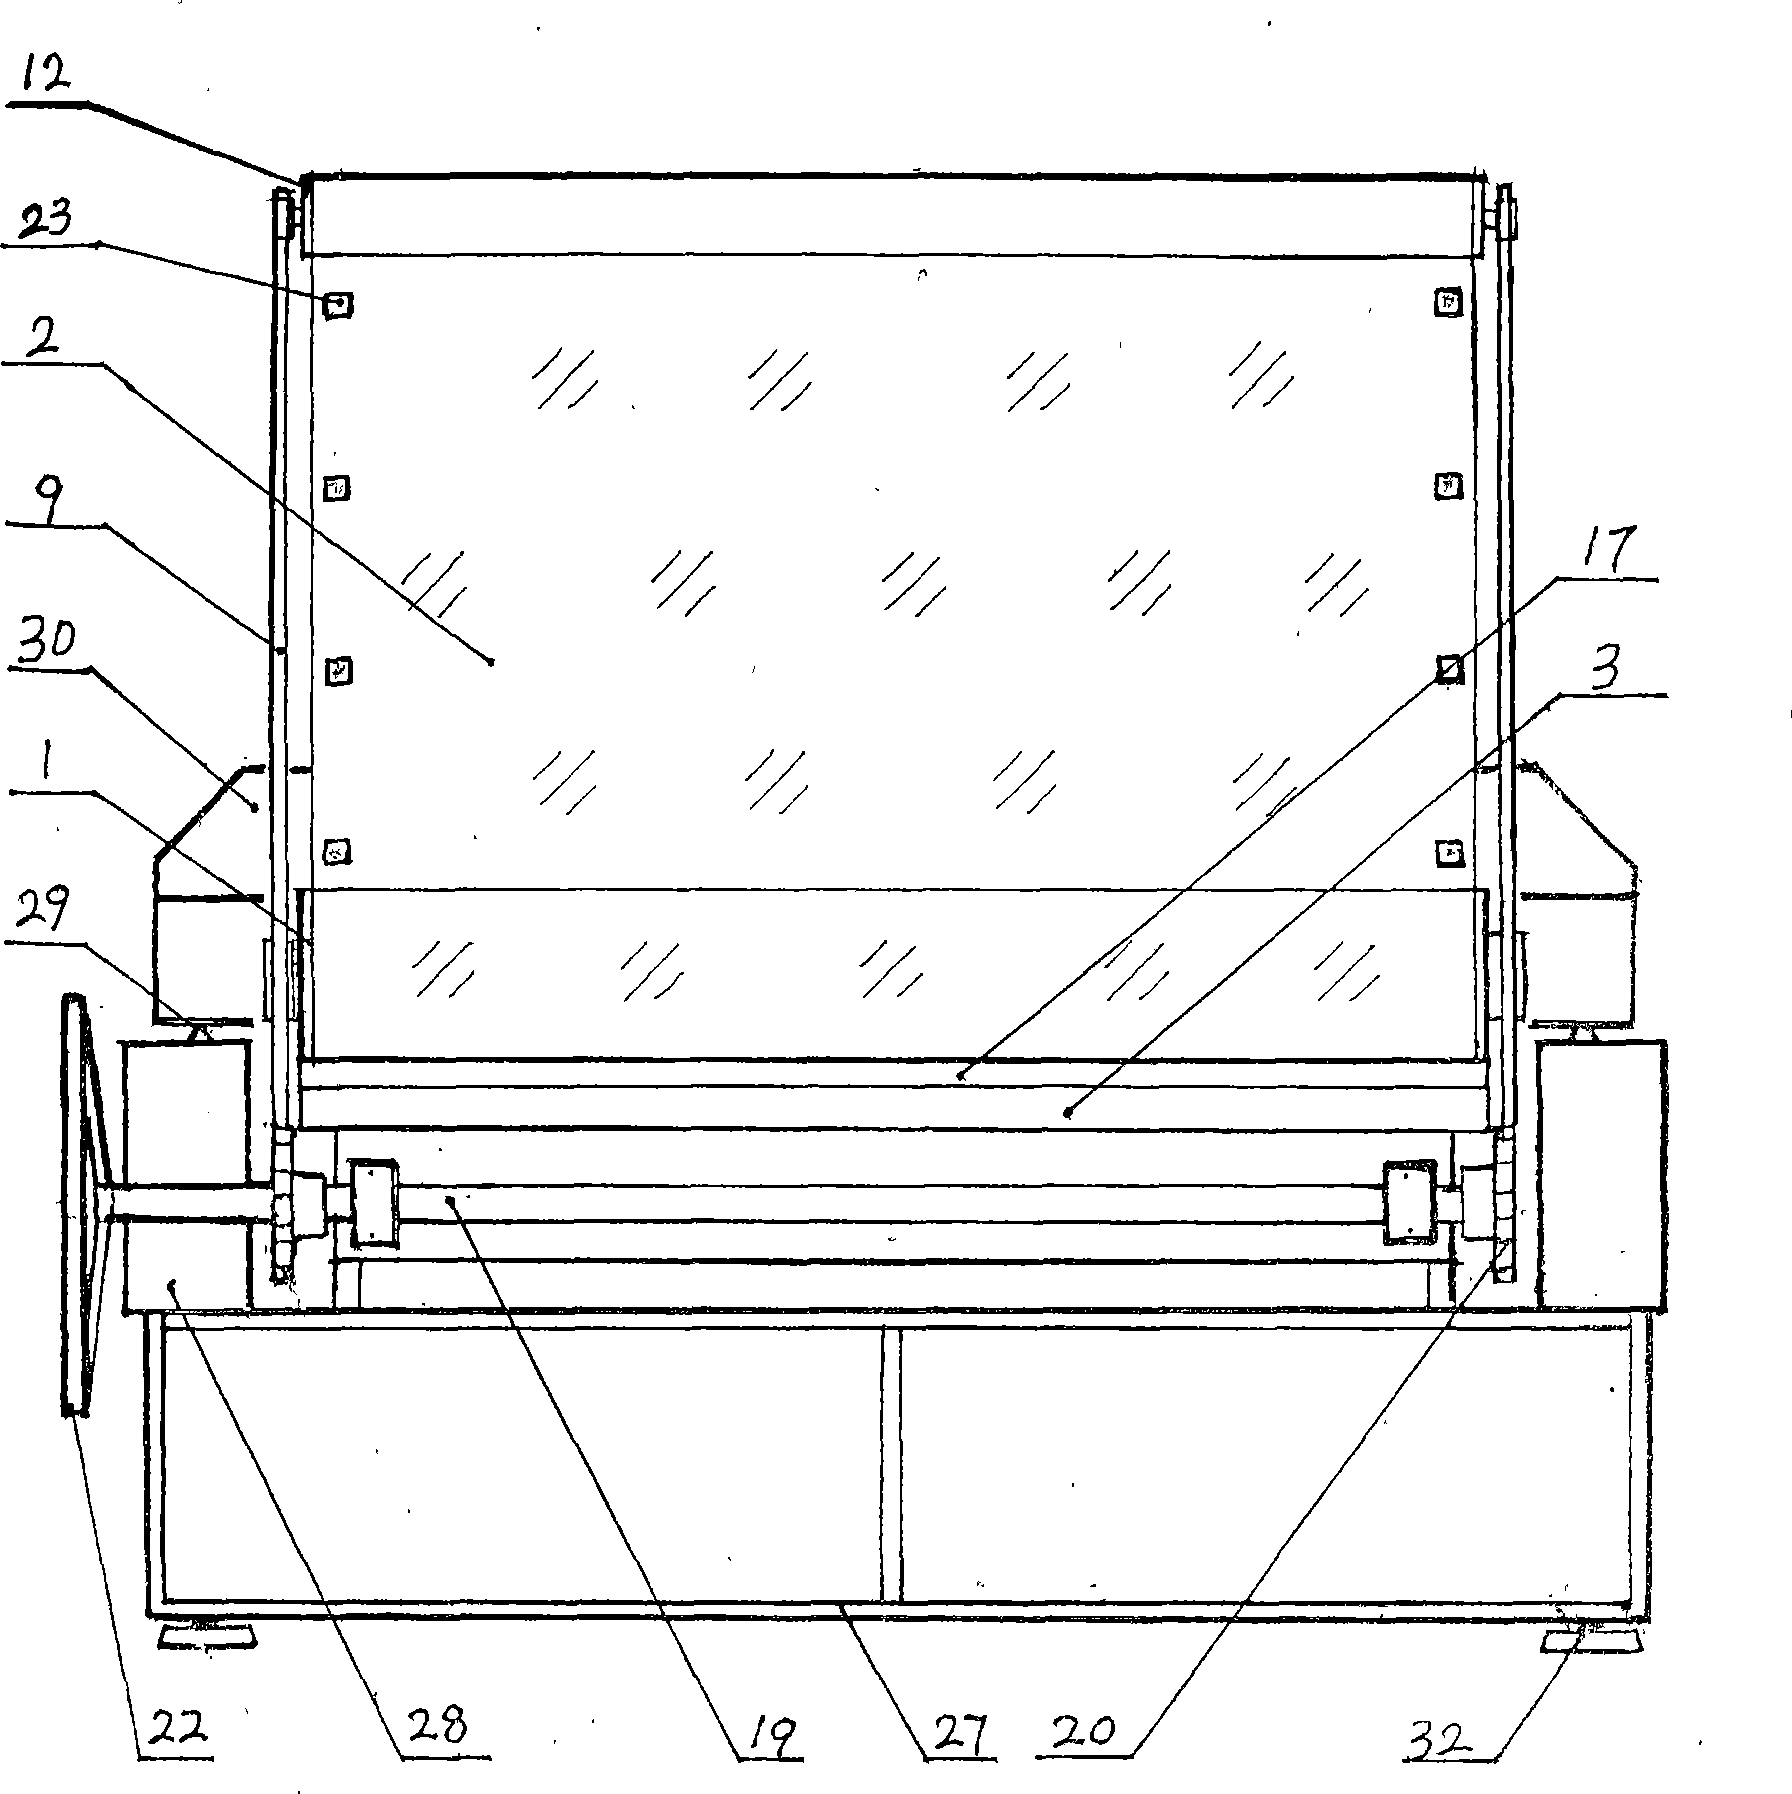 Method and device for coating and curing ultraviolet curing coating